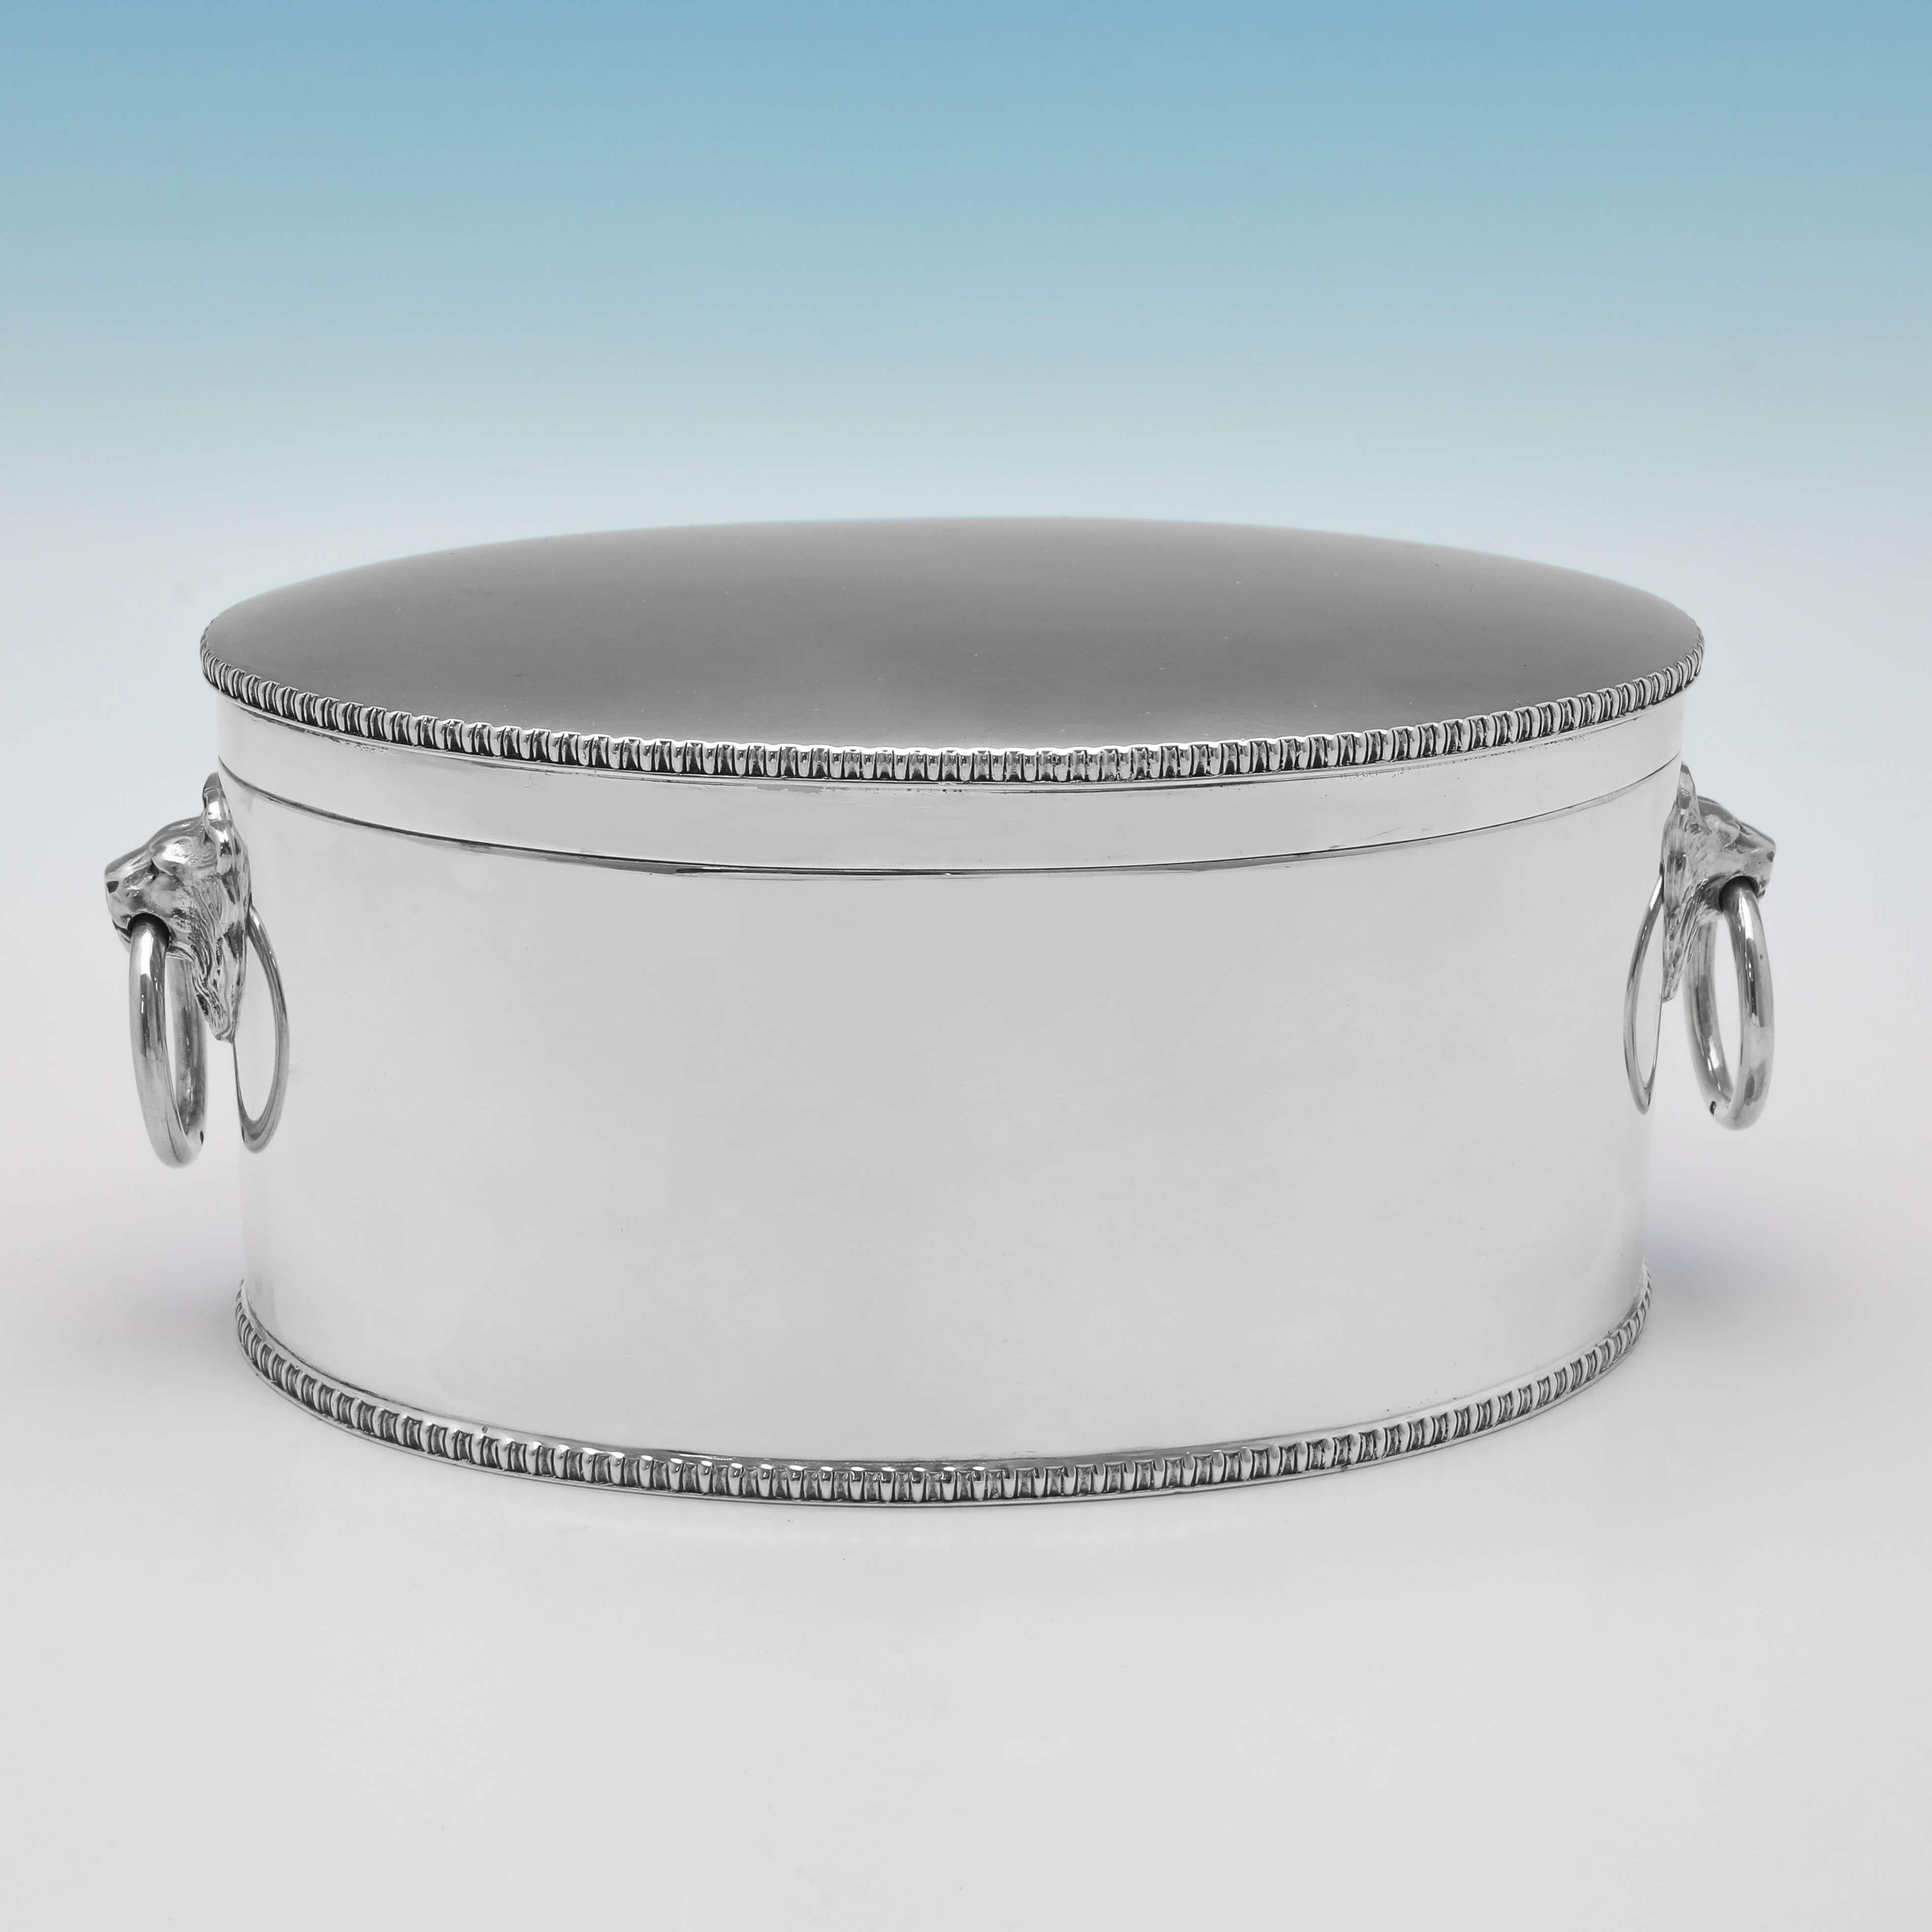 Hallmarked in Sheffield in 1930 by Atkin Brothers, this handsome, Sterling Silver Biscuit Box, is oval in shape, and features gadroon borders, and drop ring lion mask handles. The biscuit box measures 3.75